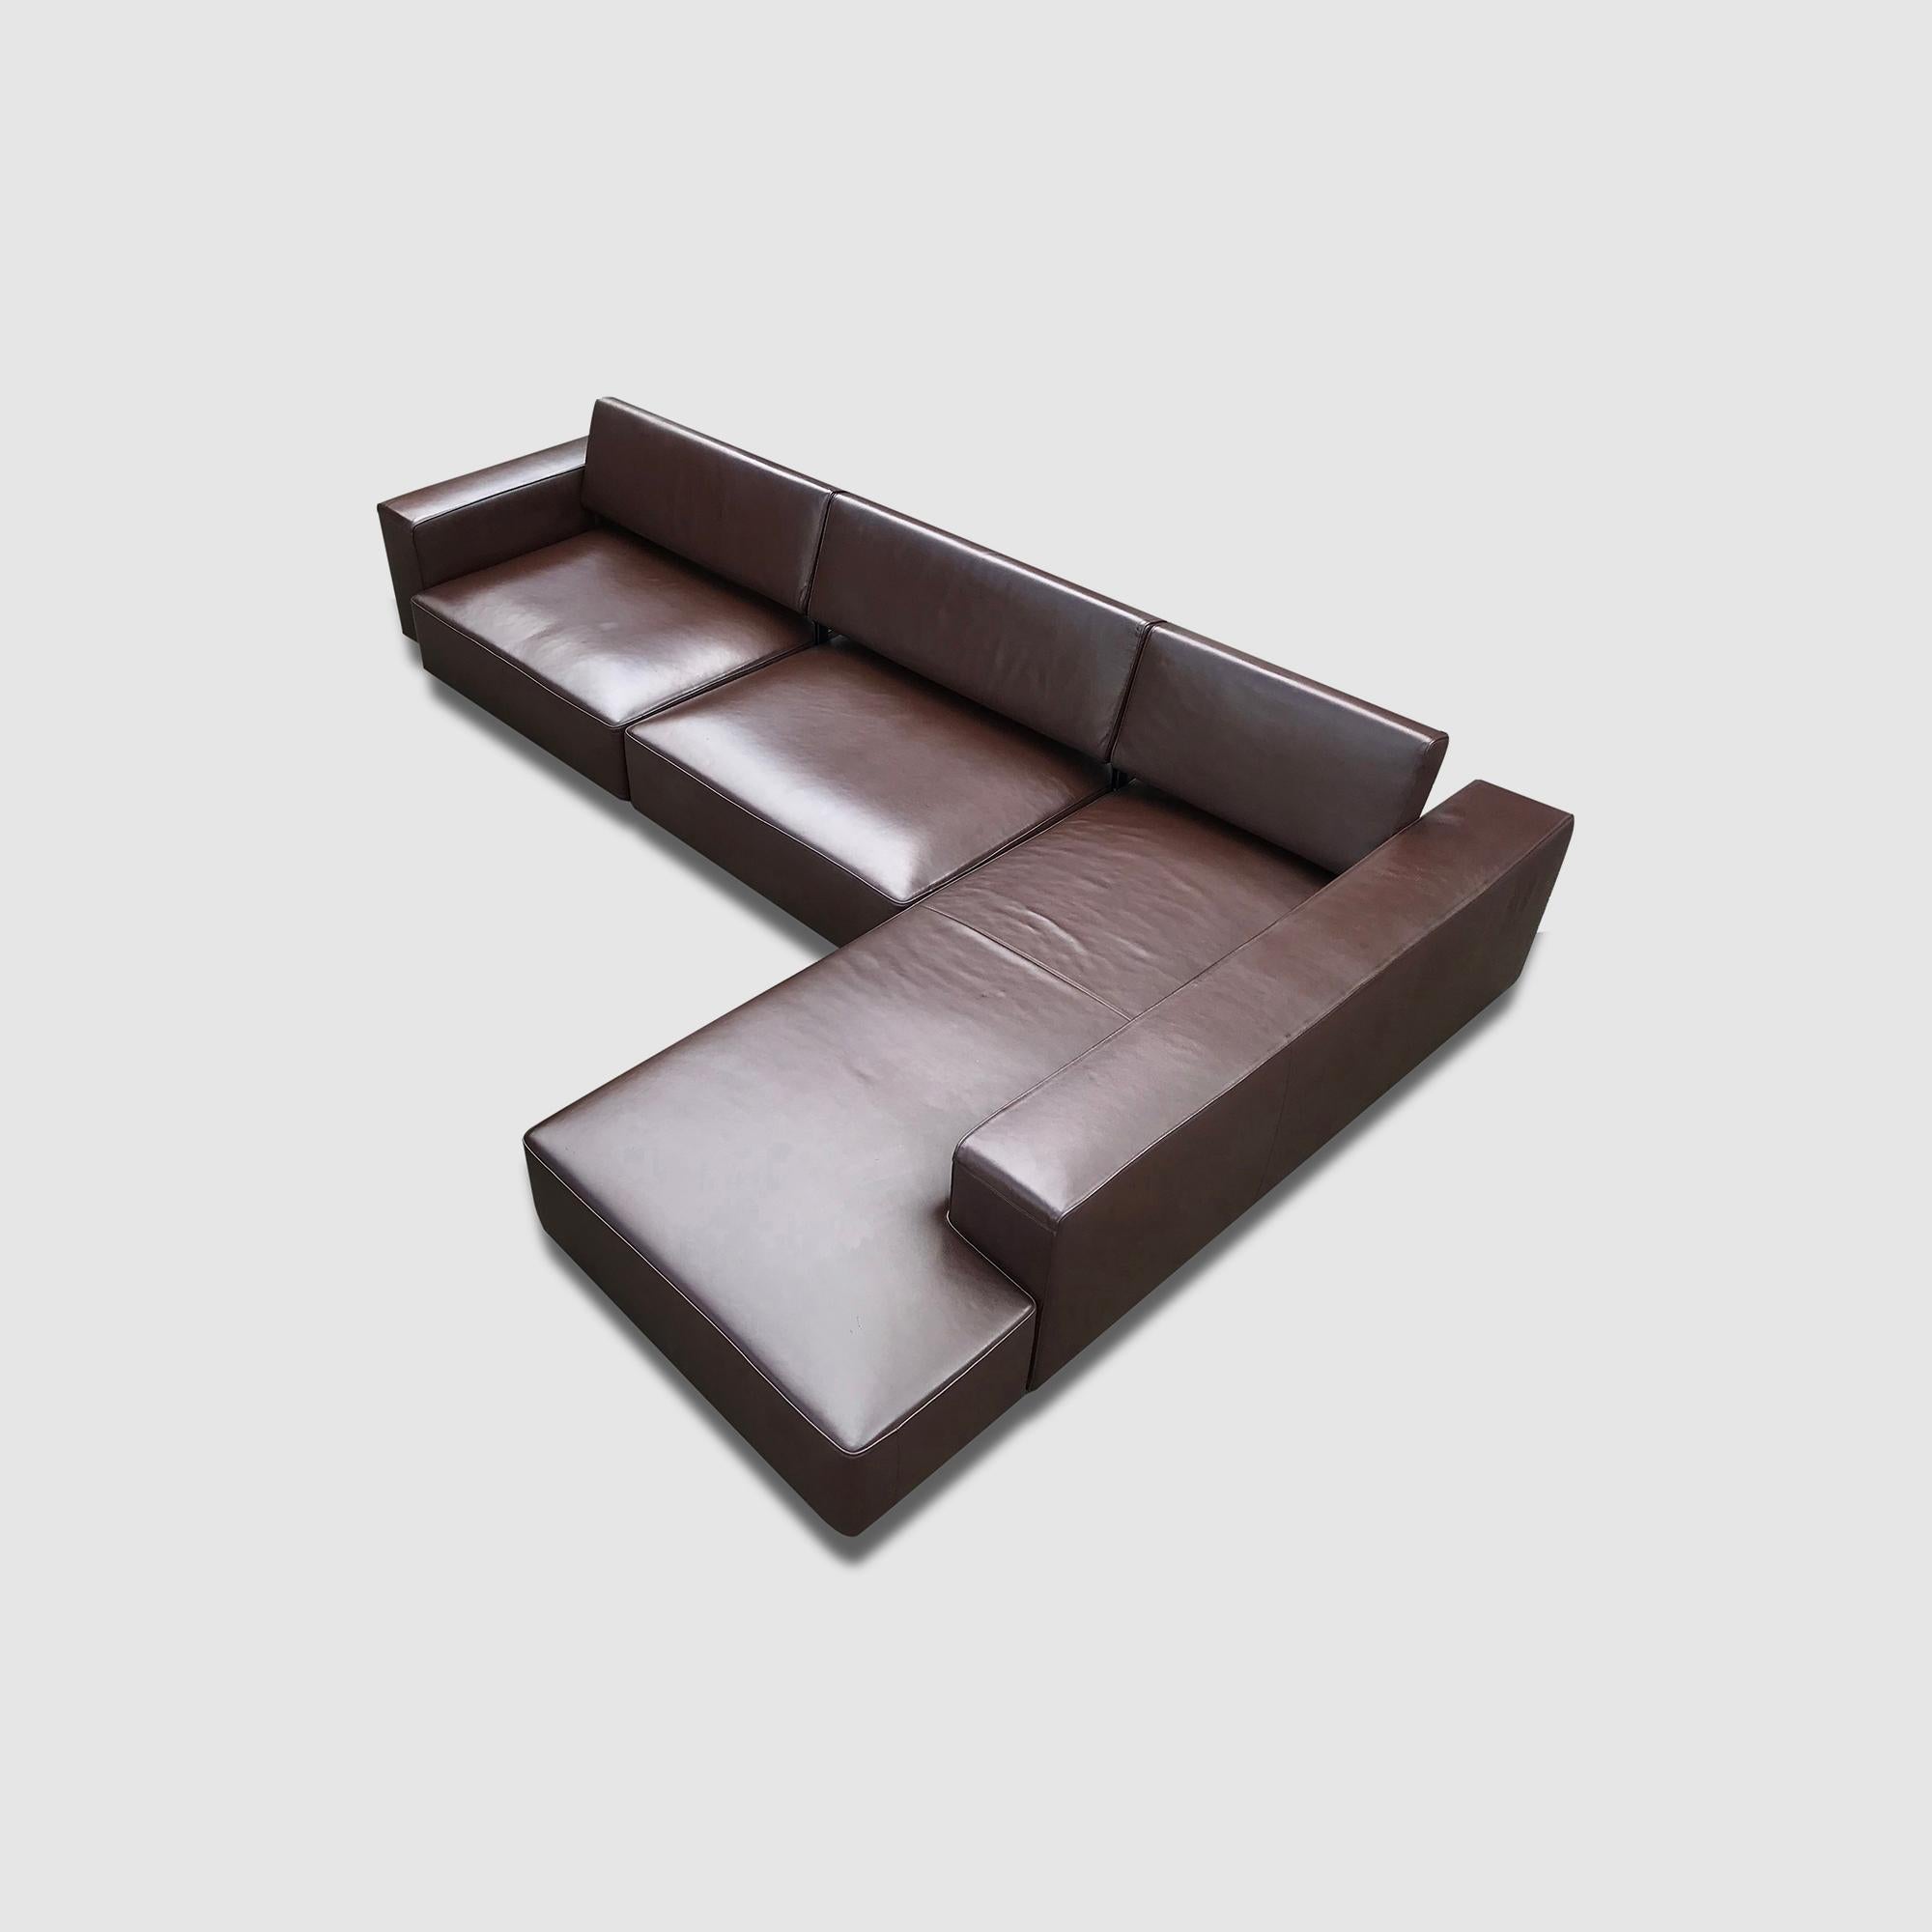 Contemporary Modular Leather Andy Landscape Sofa by Paolo Piva for B&B Italia 2013